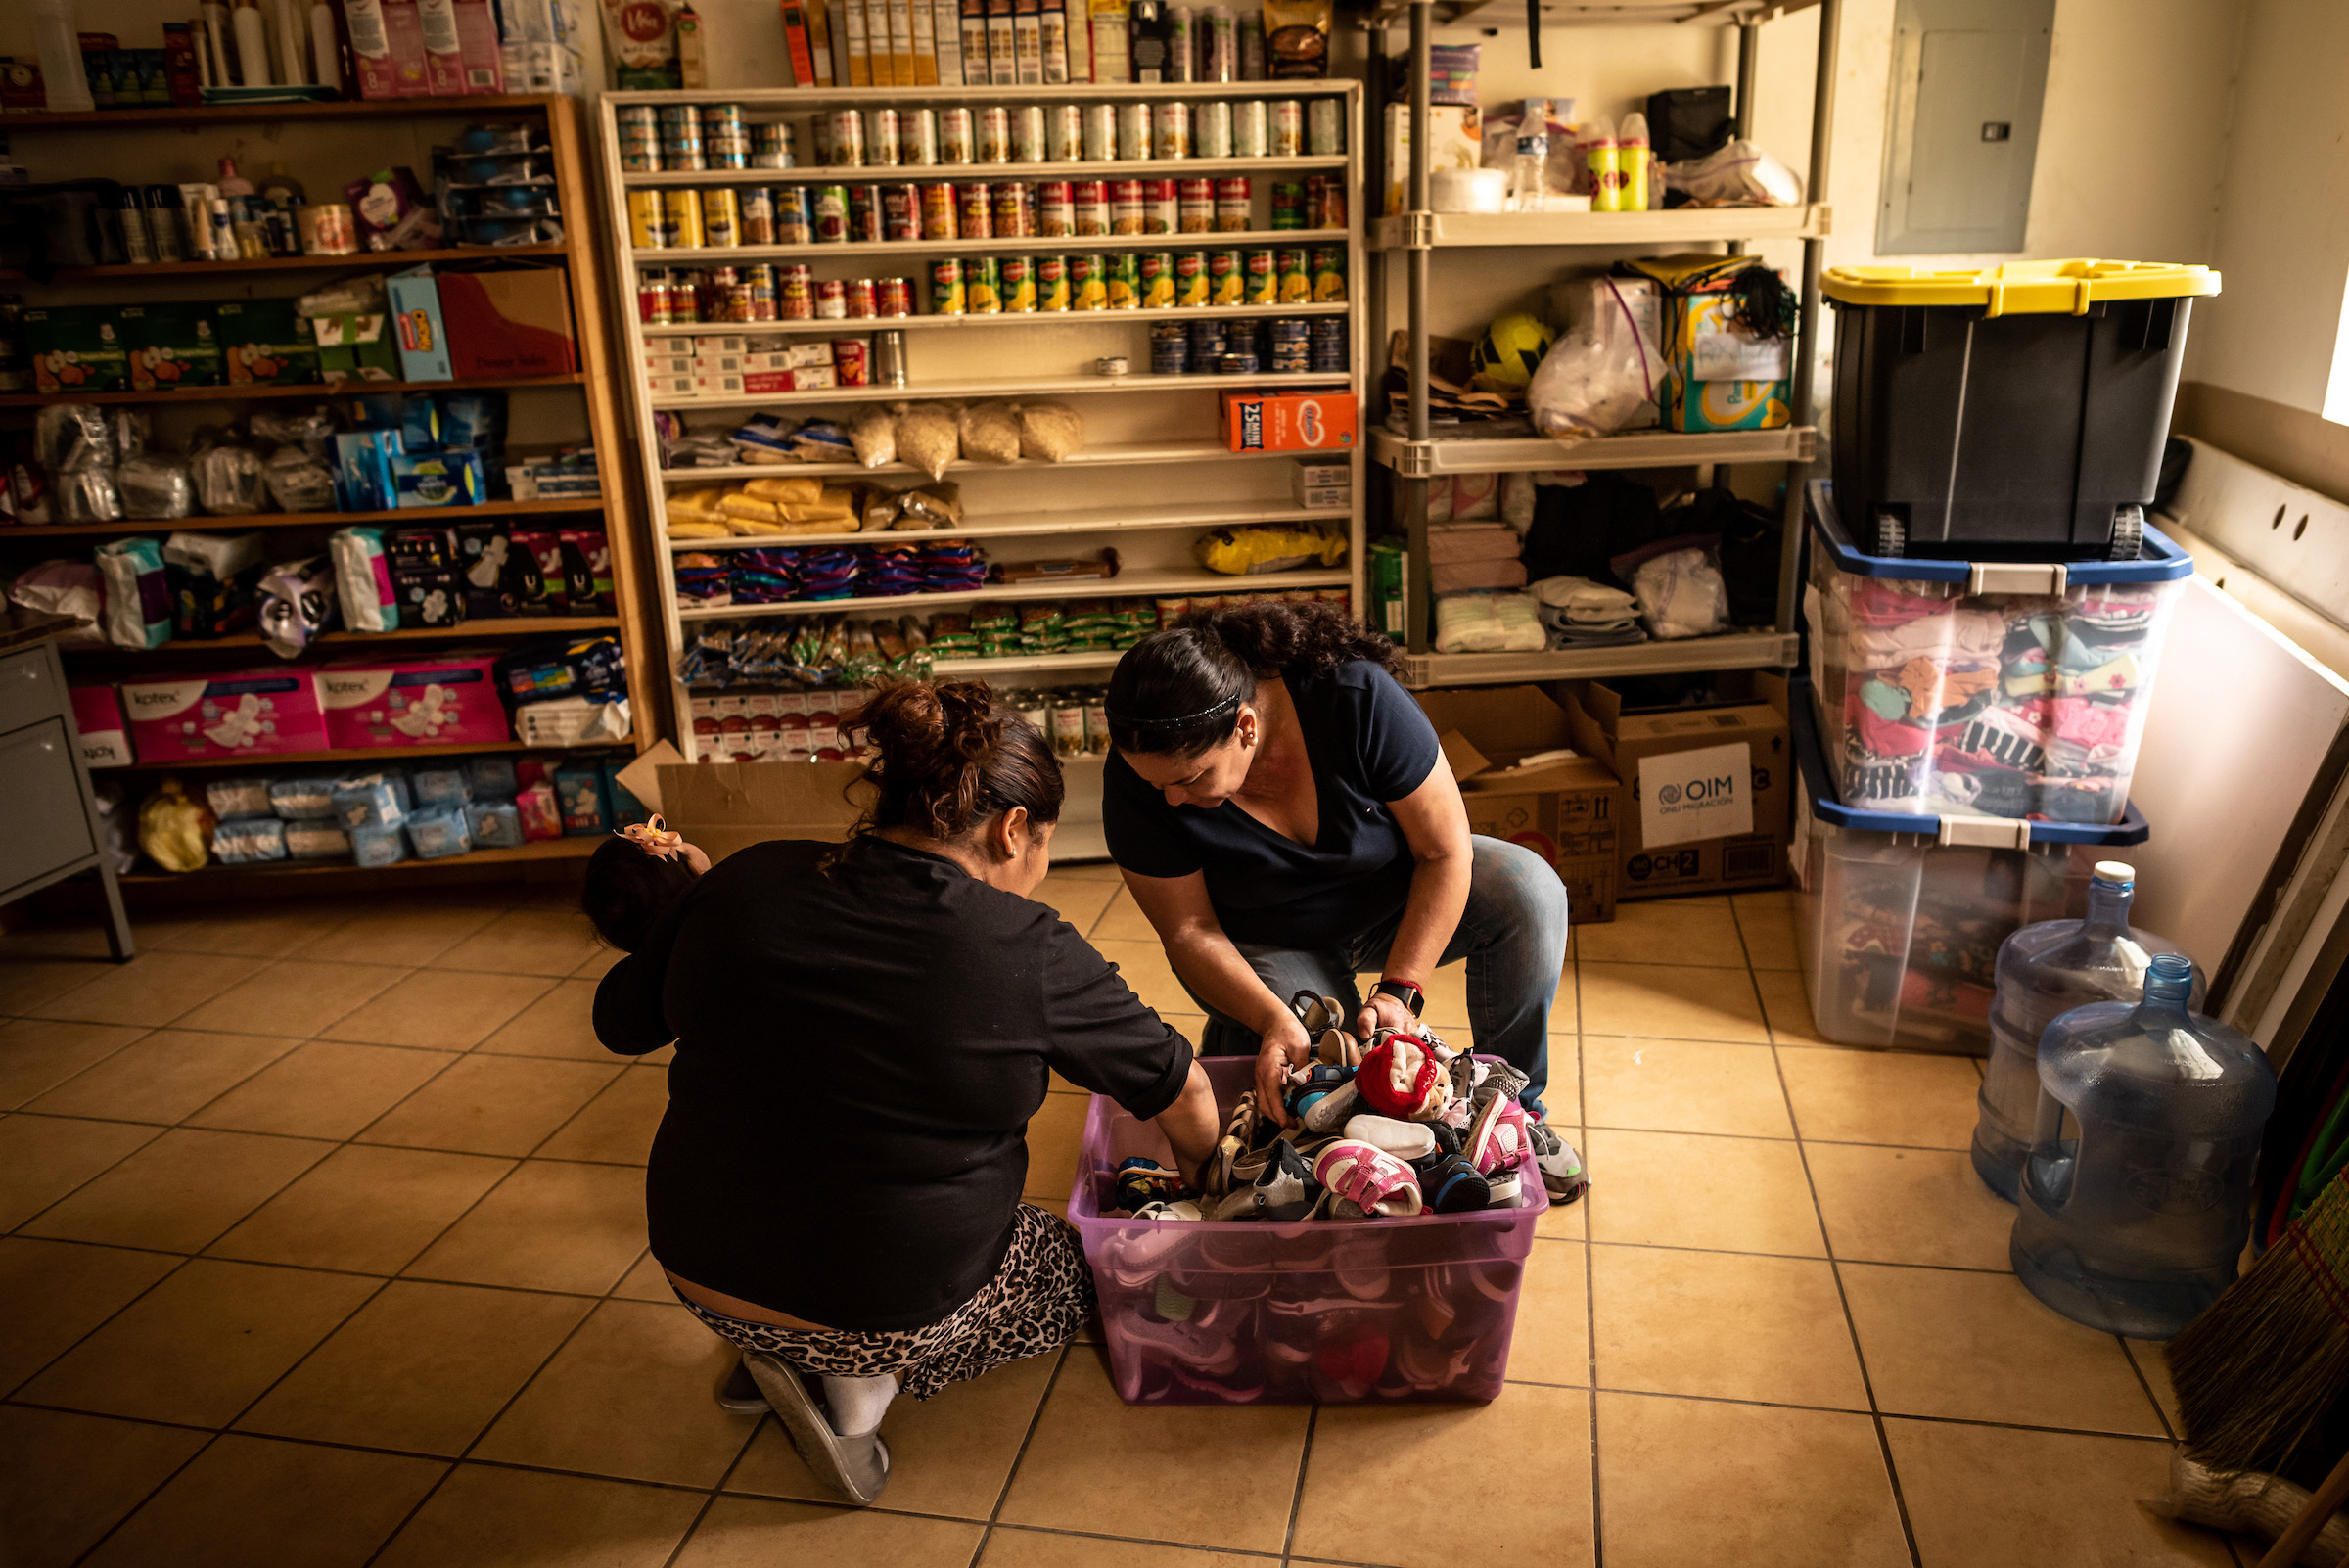 Shelter volunteer Marta Leticia Galarza Gandara, right, helps Isa find shoes for her baby daughter in a box of donations. Isa is an asylum seeker from Honduras, and has been waiting at the border under MPP since September 2019.